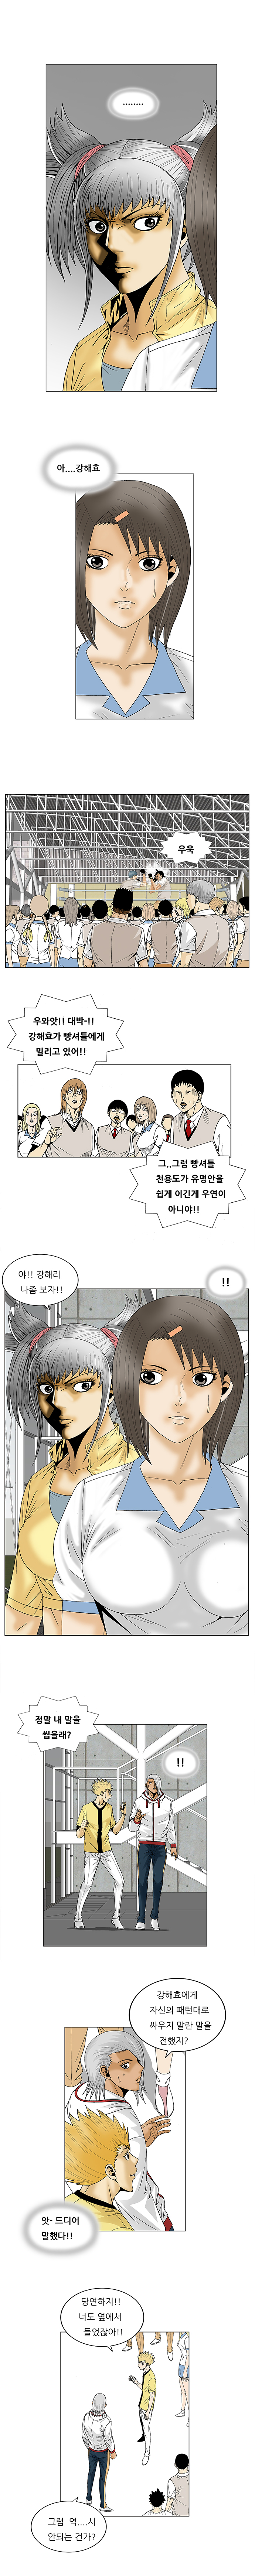 Ultimate Legend - Kang Hae Hyo - Chapter 86 - Page 10